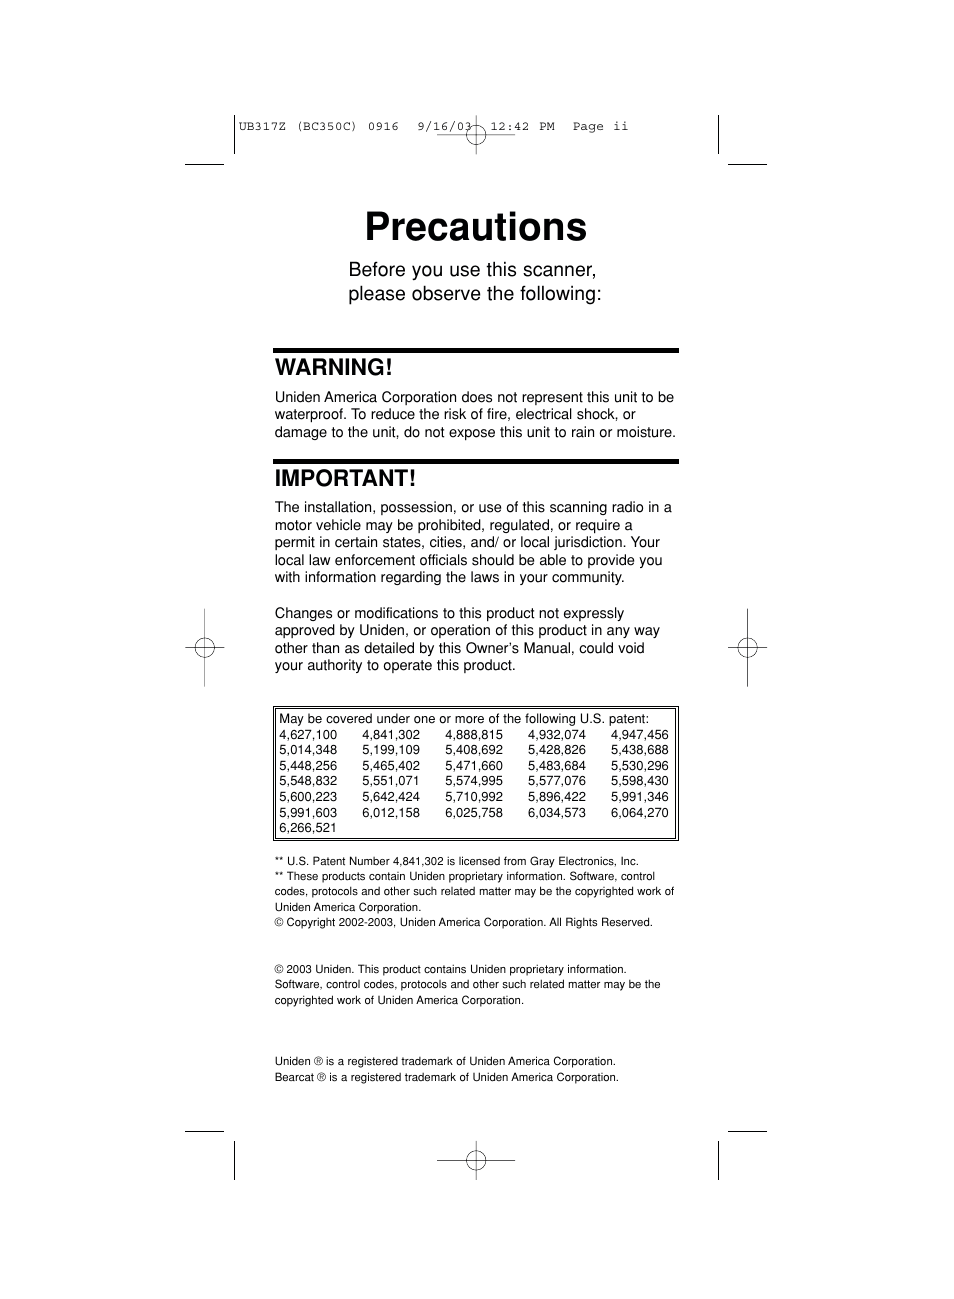 Precautions, Warning, Important | Uniden BC350C User Manual | Page 2 / 40